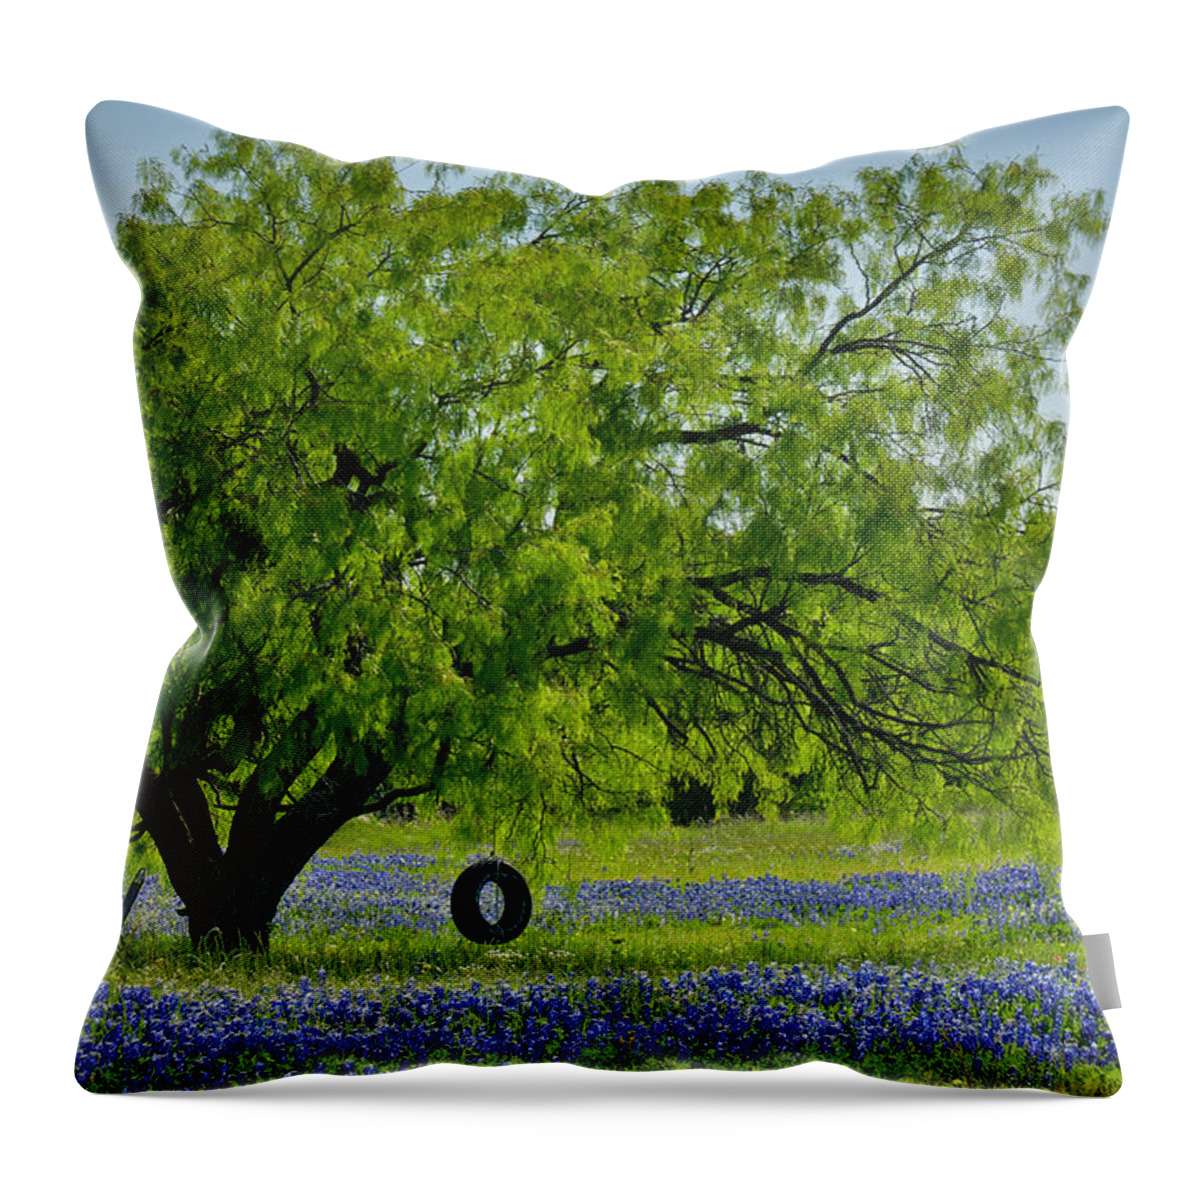 Texas Bluebonnets Throw Pillow featuring the photograph Texas Life - Bluebonnet Wildflowers landscape tire swing by Jon Holiday